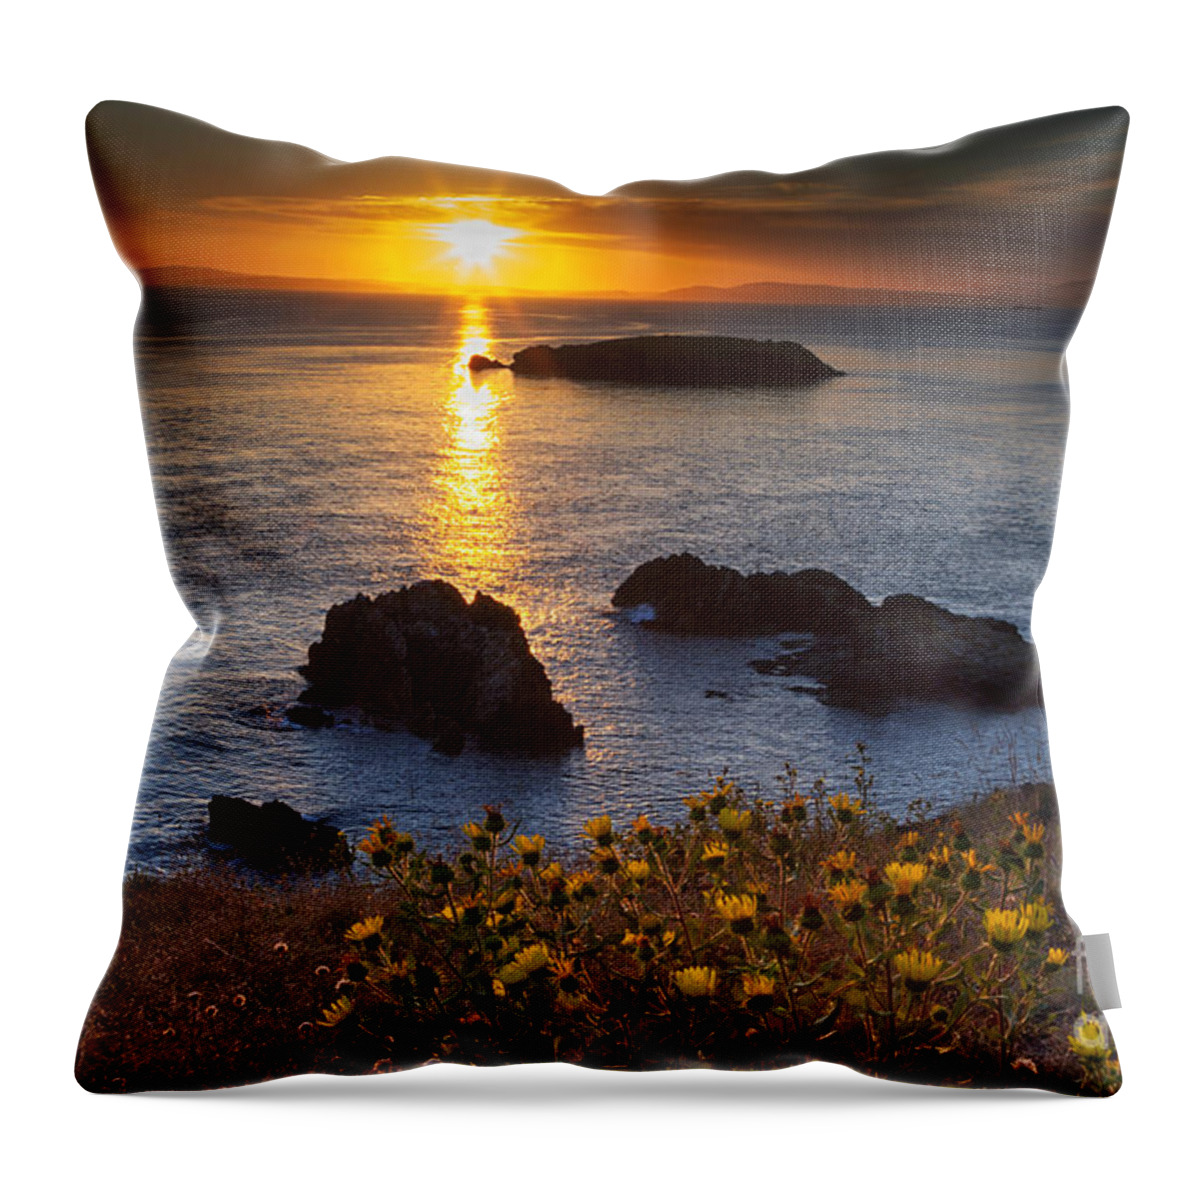 Rosario Head Throw Pillow featuring the photograph Rosario Head Sunset by Mark Kiver